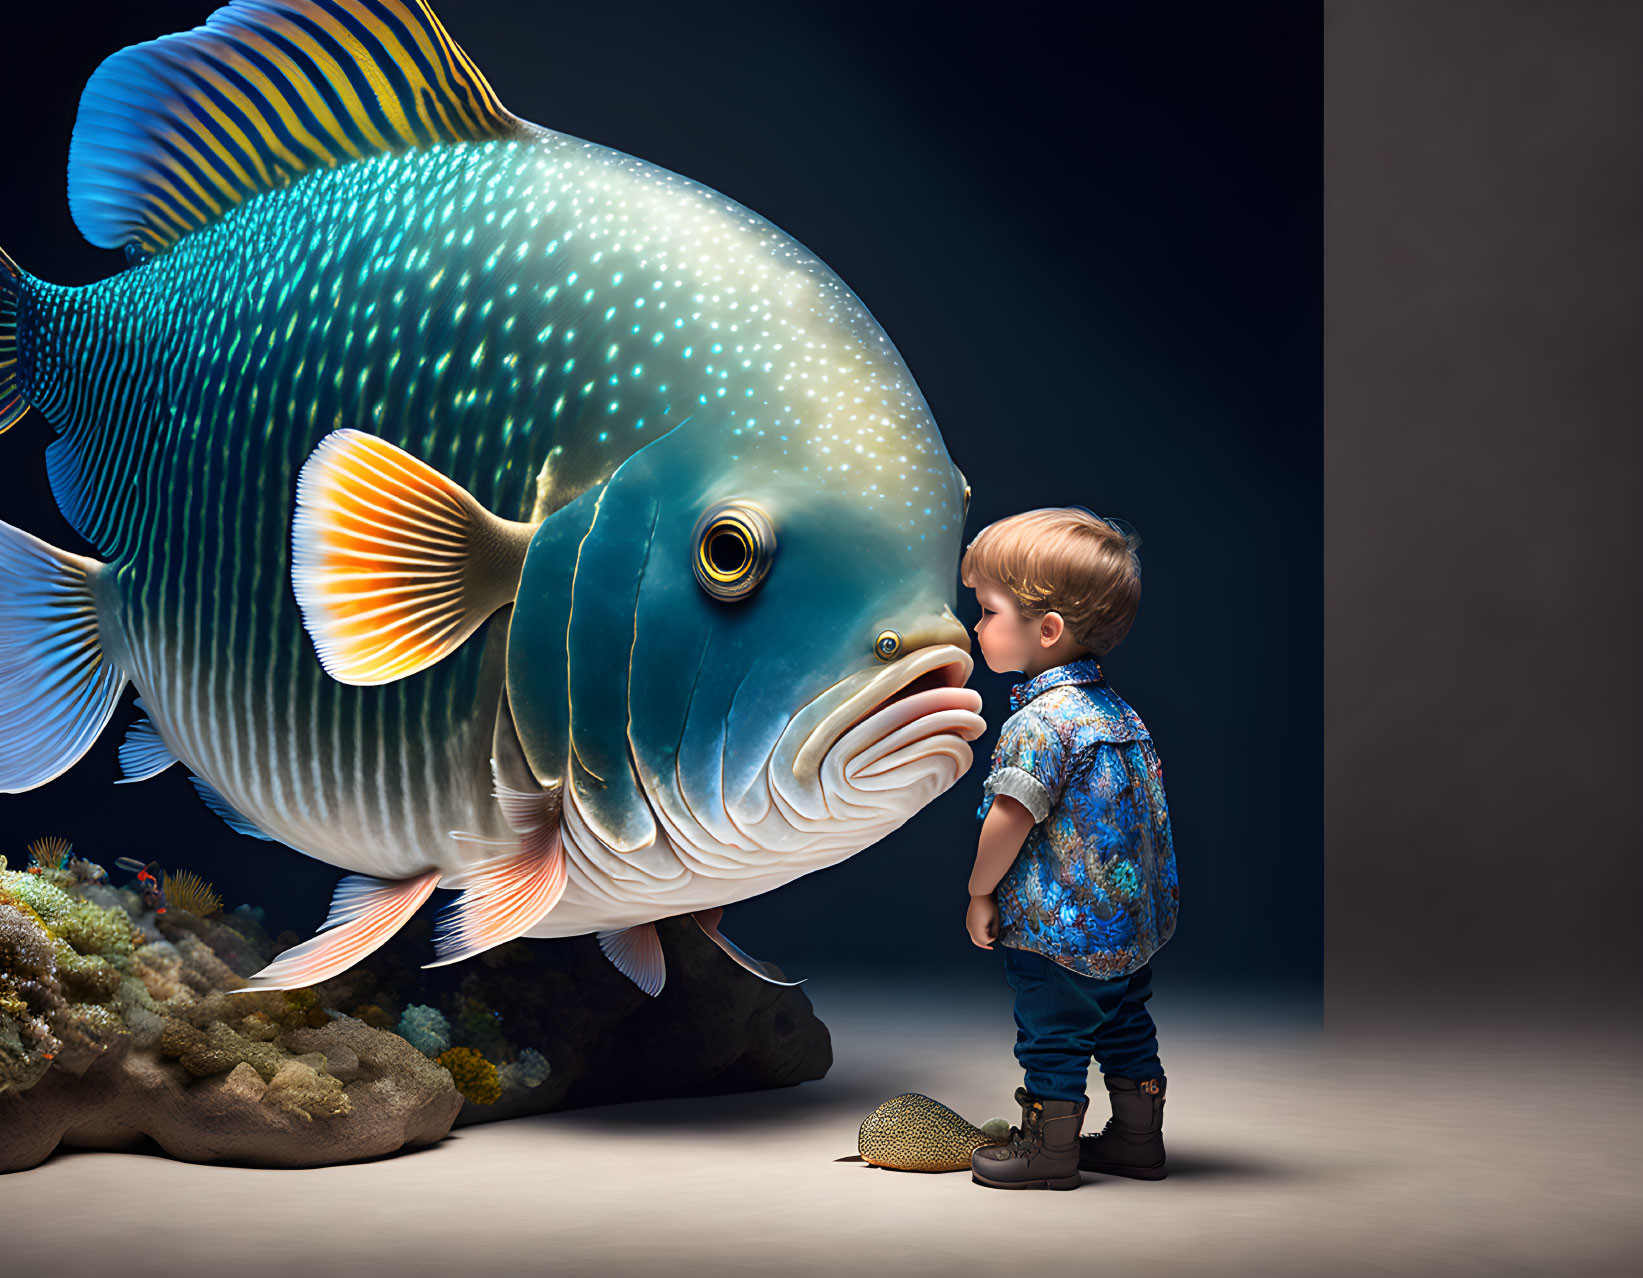 Young boy and giant fish in surreal underwater scene with coral.